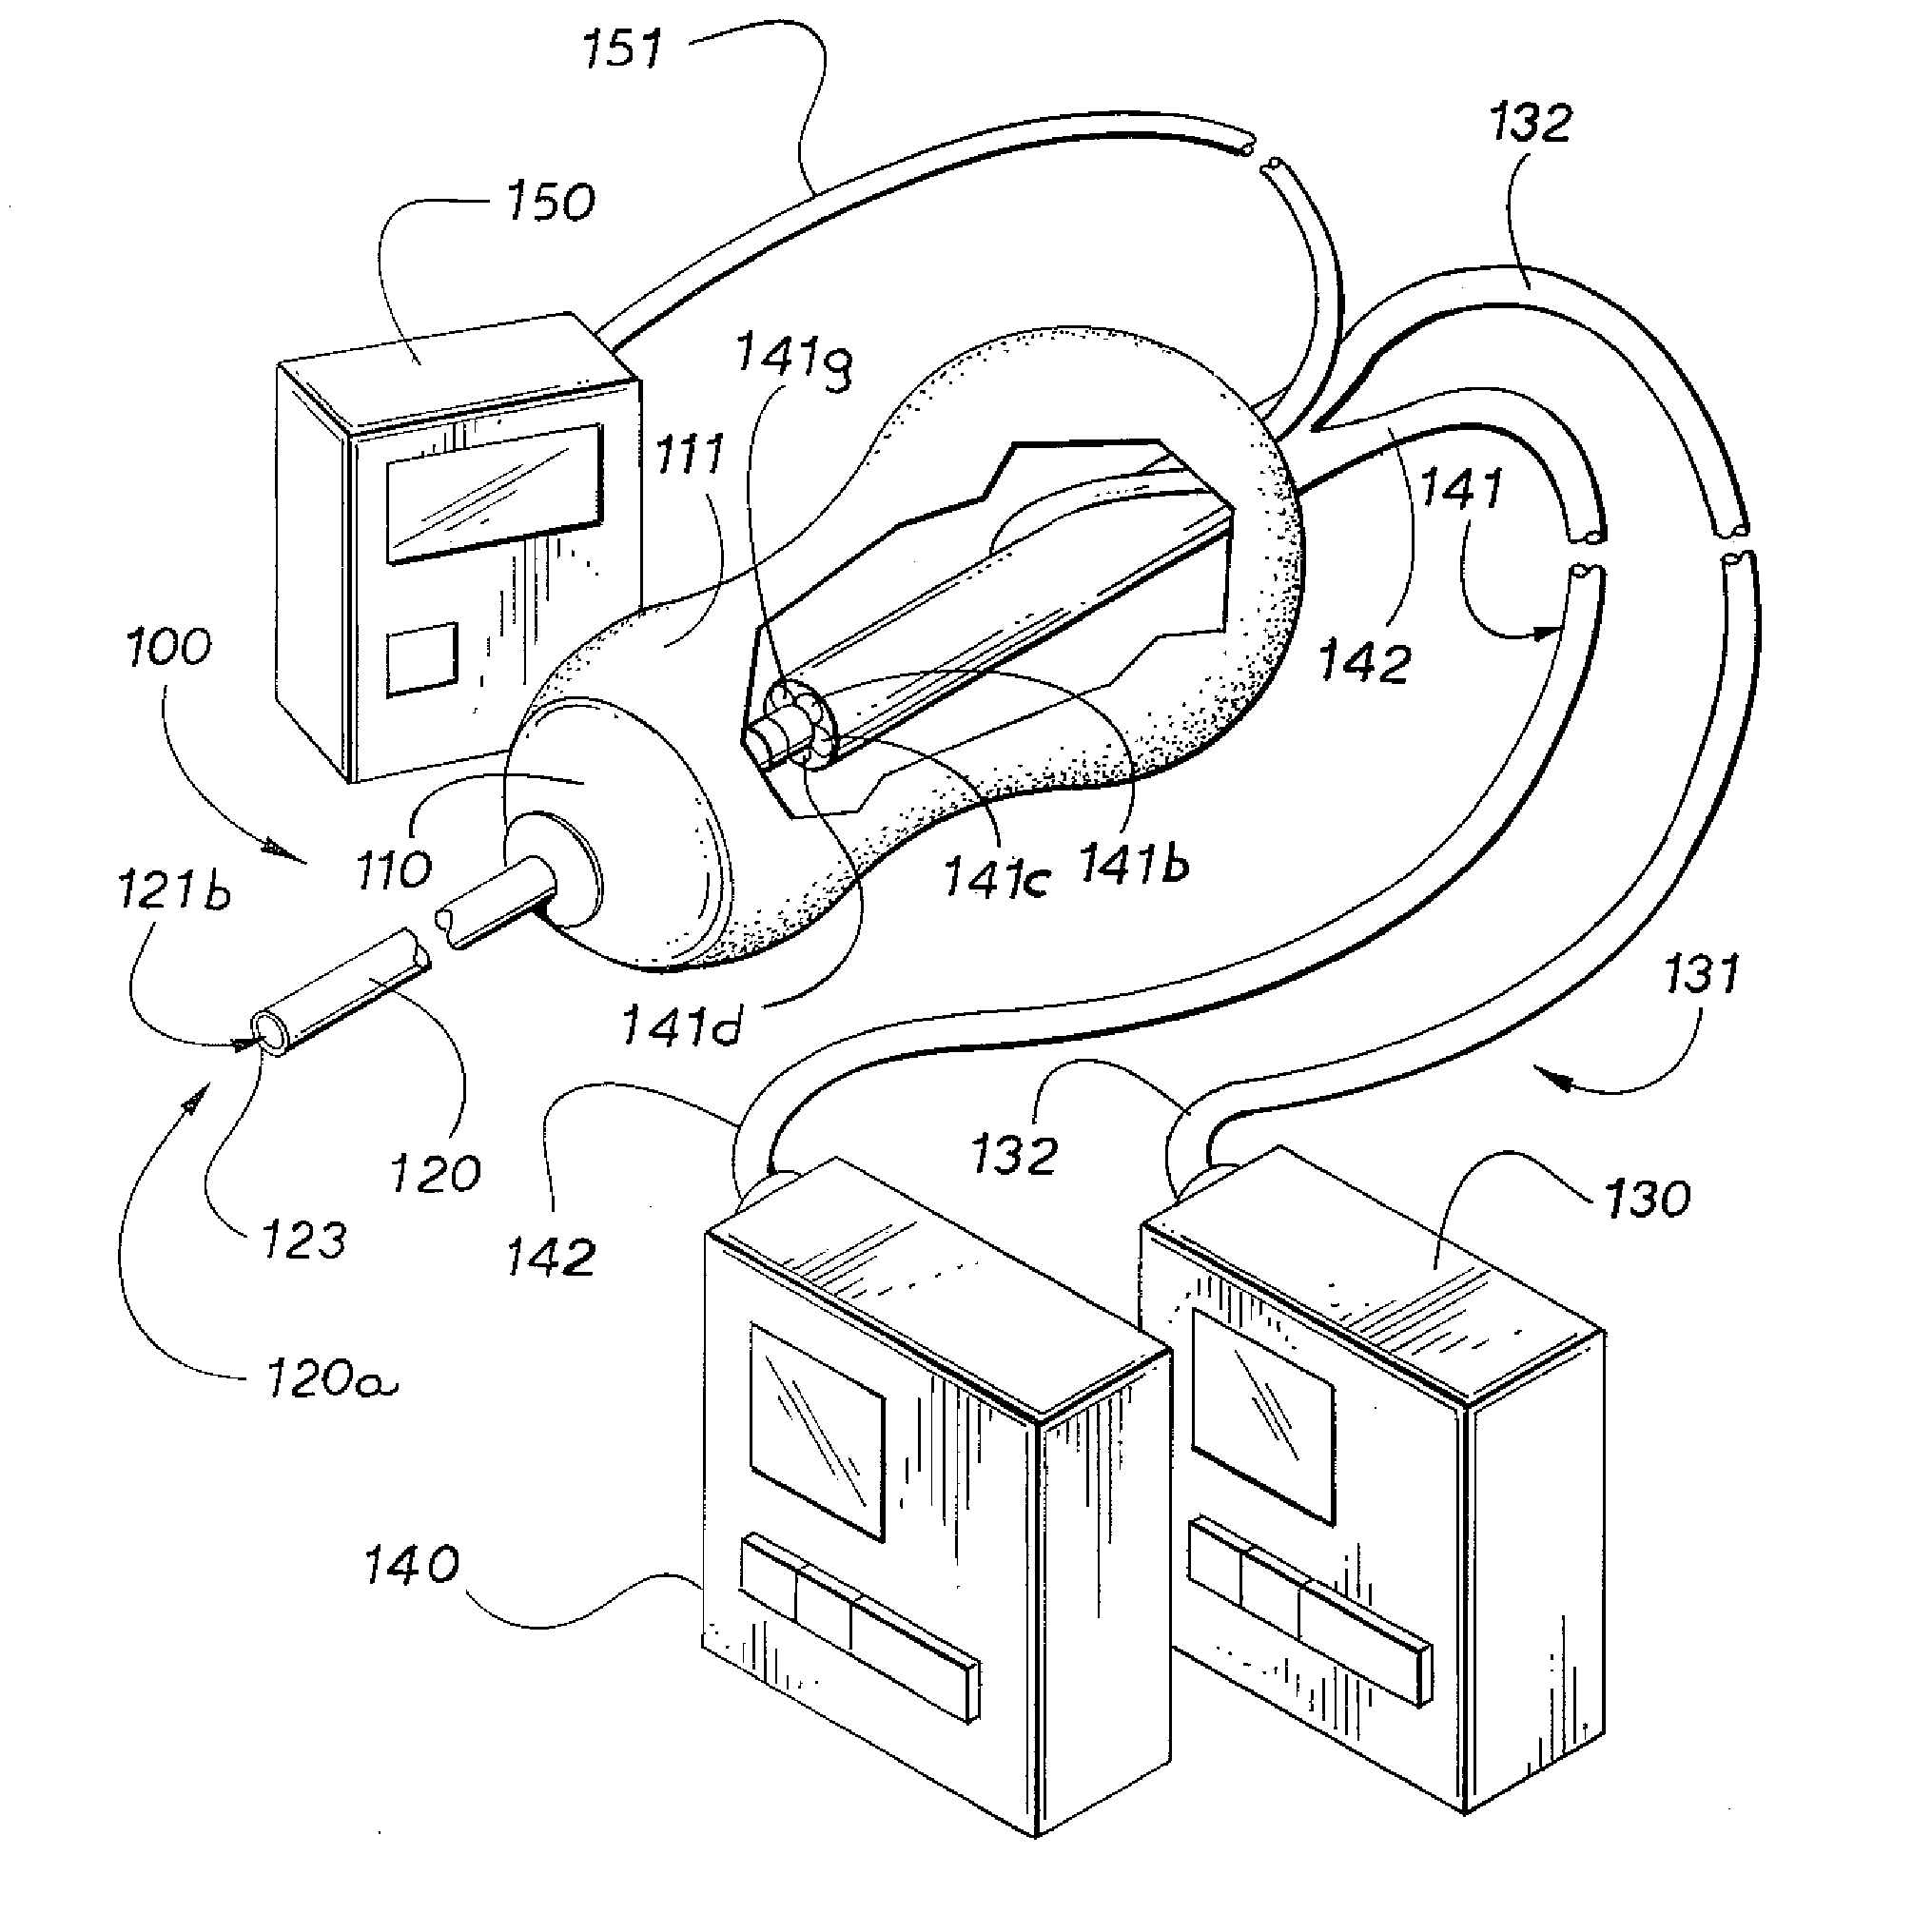 Ophthalmic Surgical Device